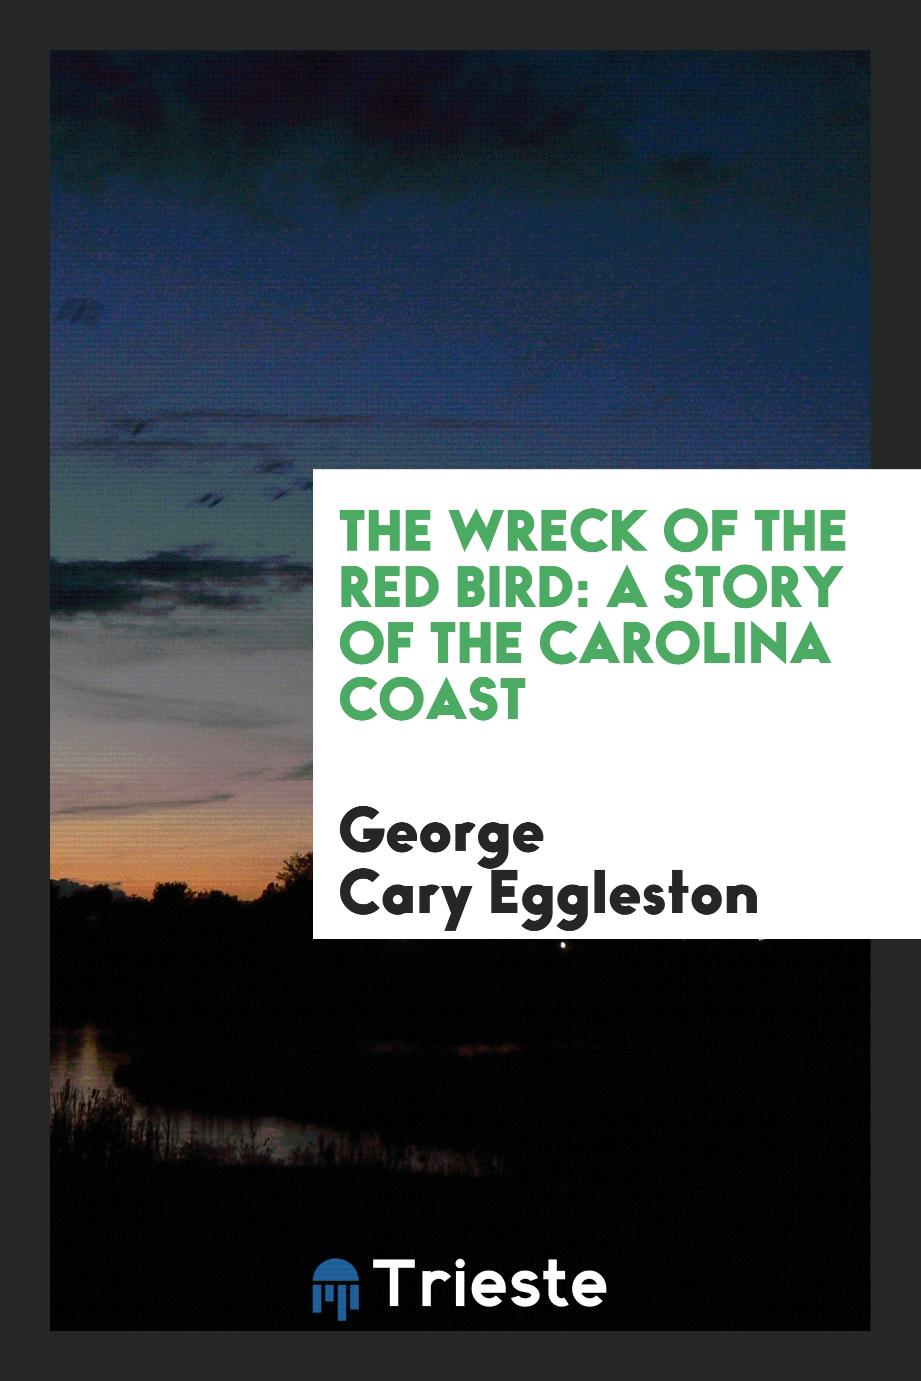 The wreck of the red bird: a story of the Carolina coast